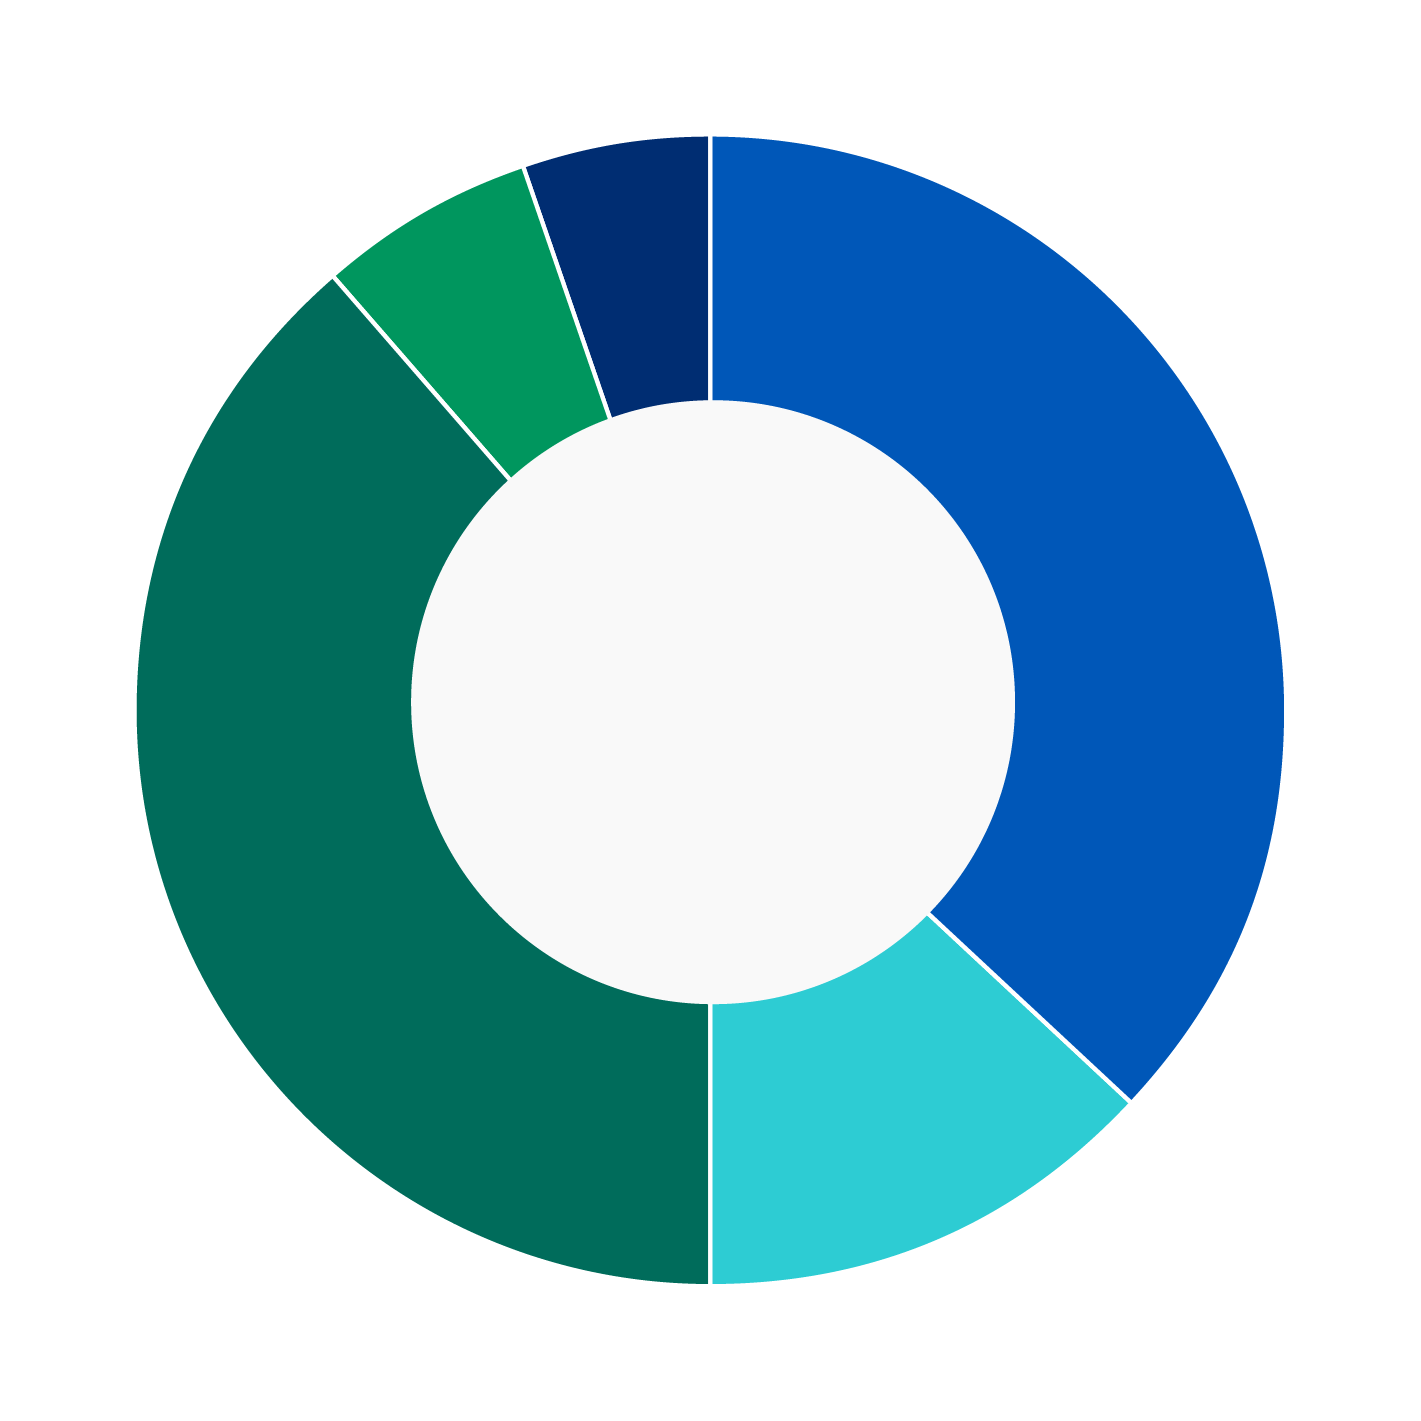 This donut chart shows the percentage of assets allocated to each category as a percentage of the whole.